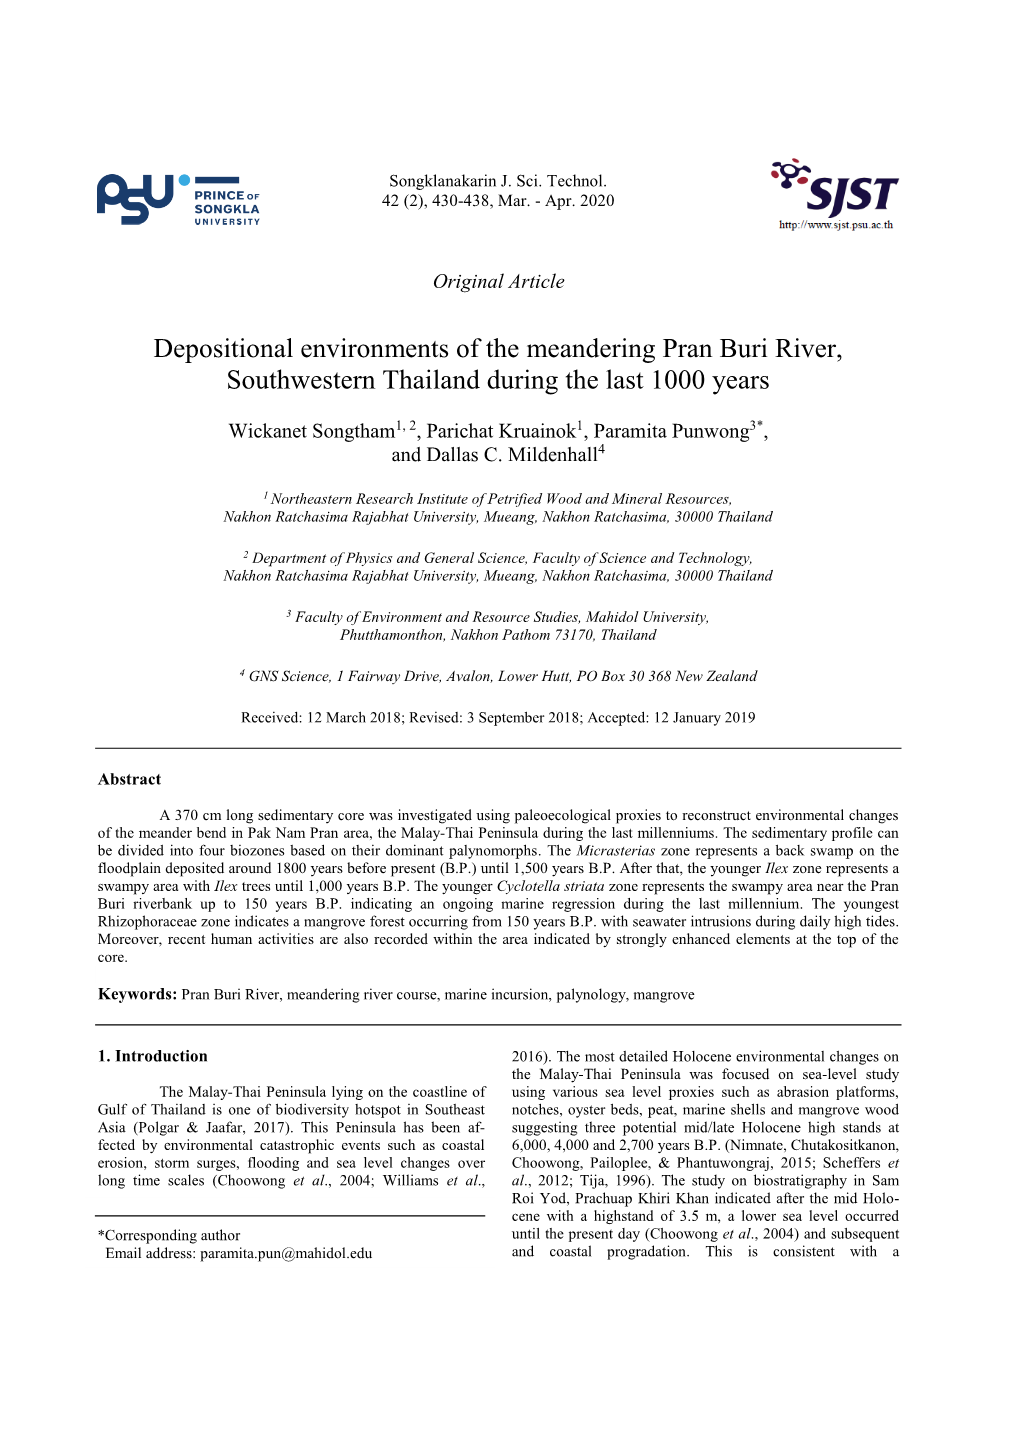 Depositional Environments of the Meandering Pran Buri River, Southwestern Thailand During the Last 1000 Years